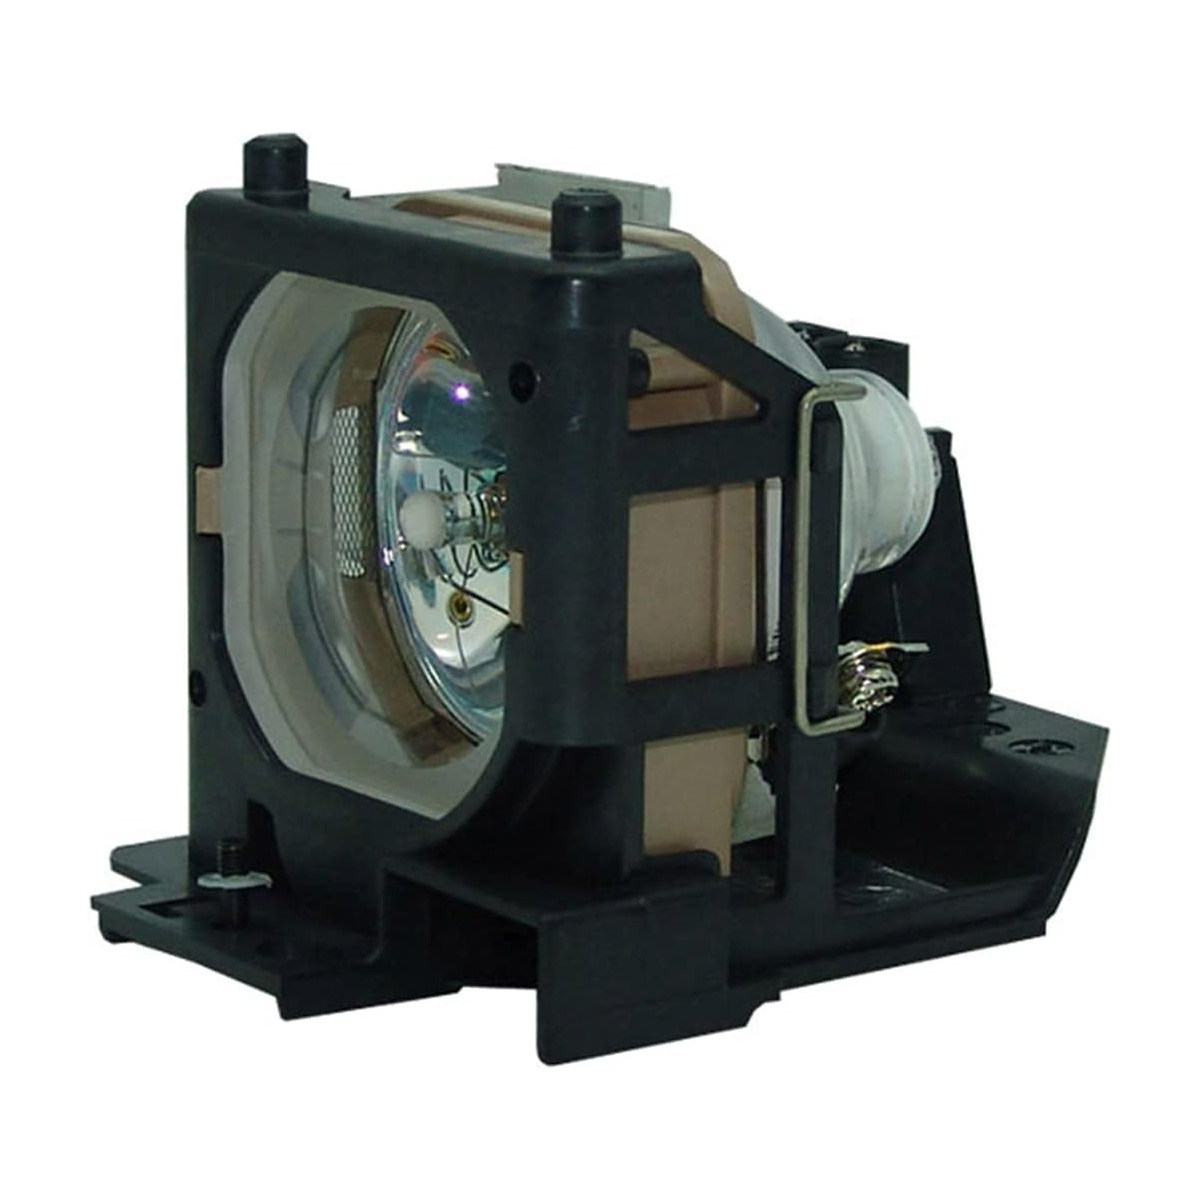 Replacement Projector lamp RLC-007 For VIEWSONIC PJ405D